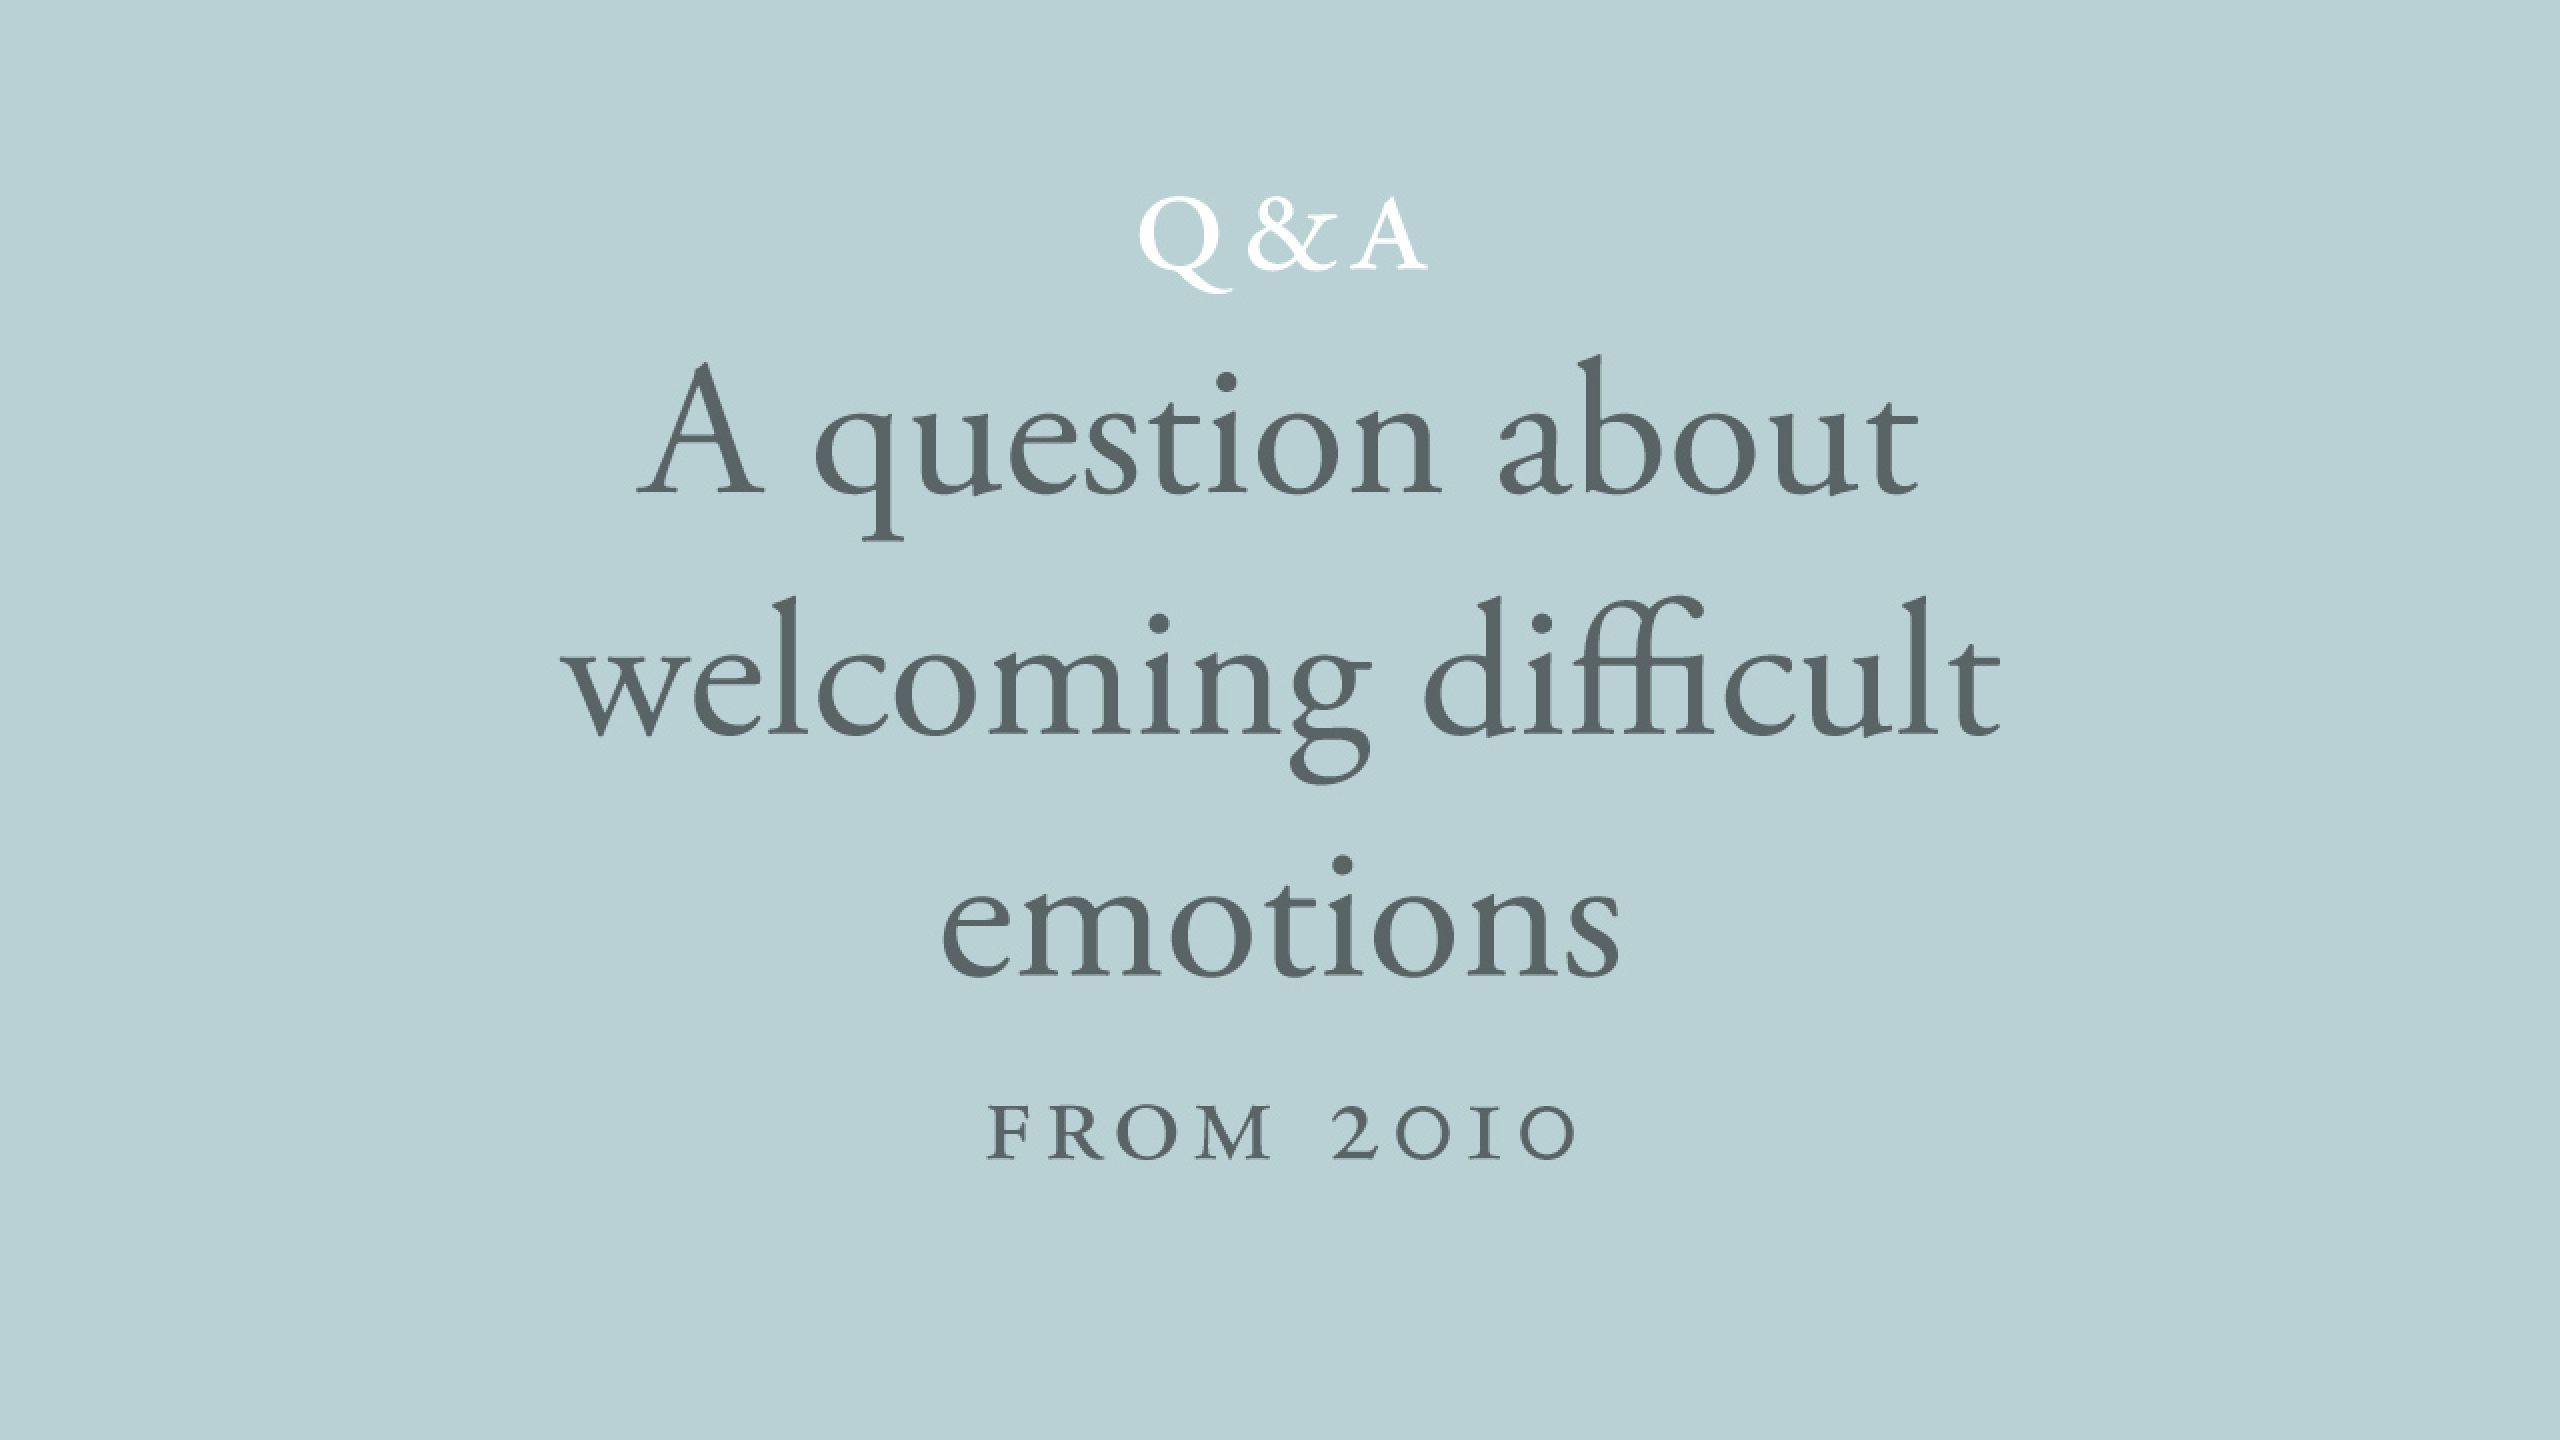 Can difficult emotions be dispelled by welcoming them?